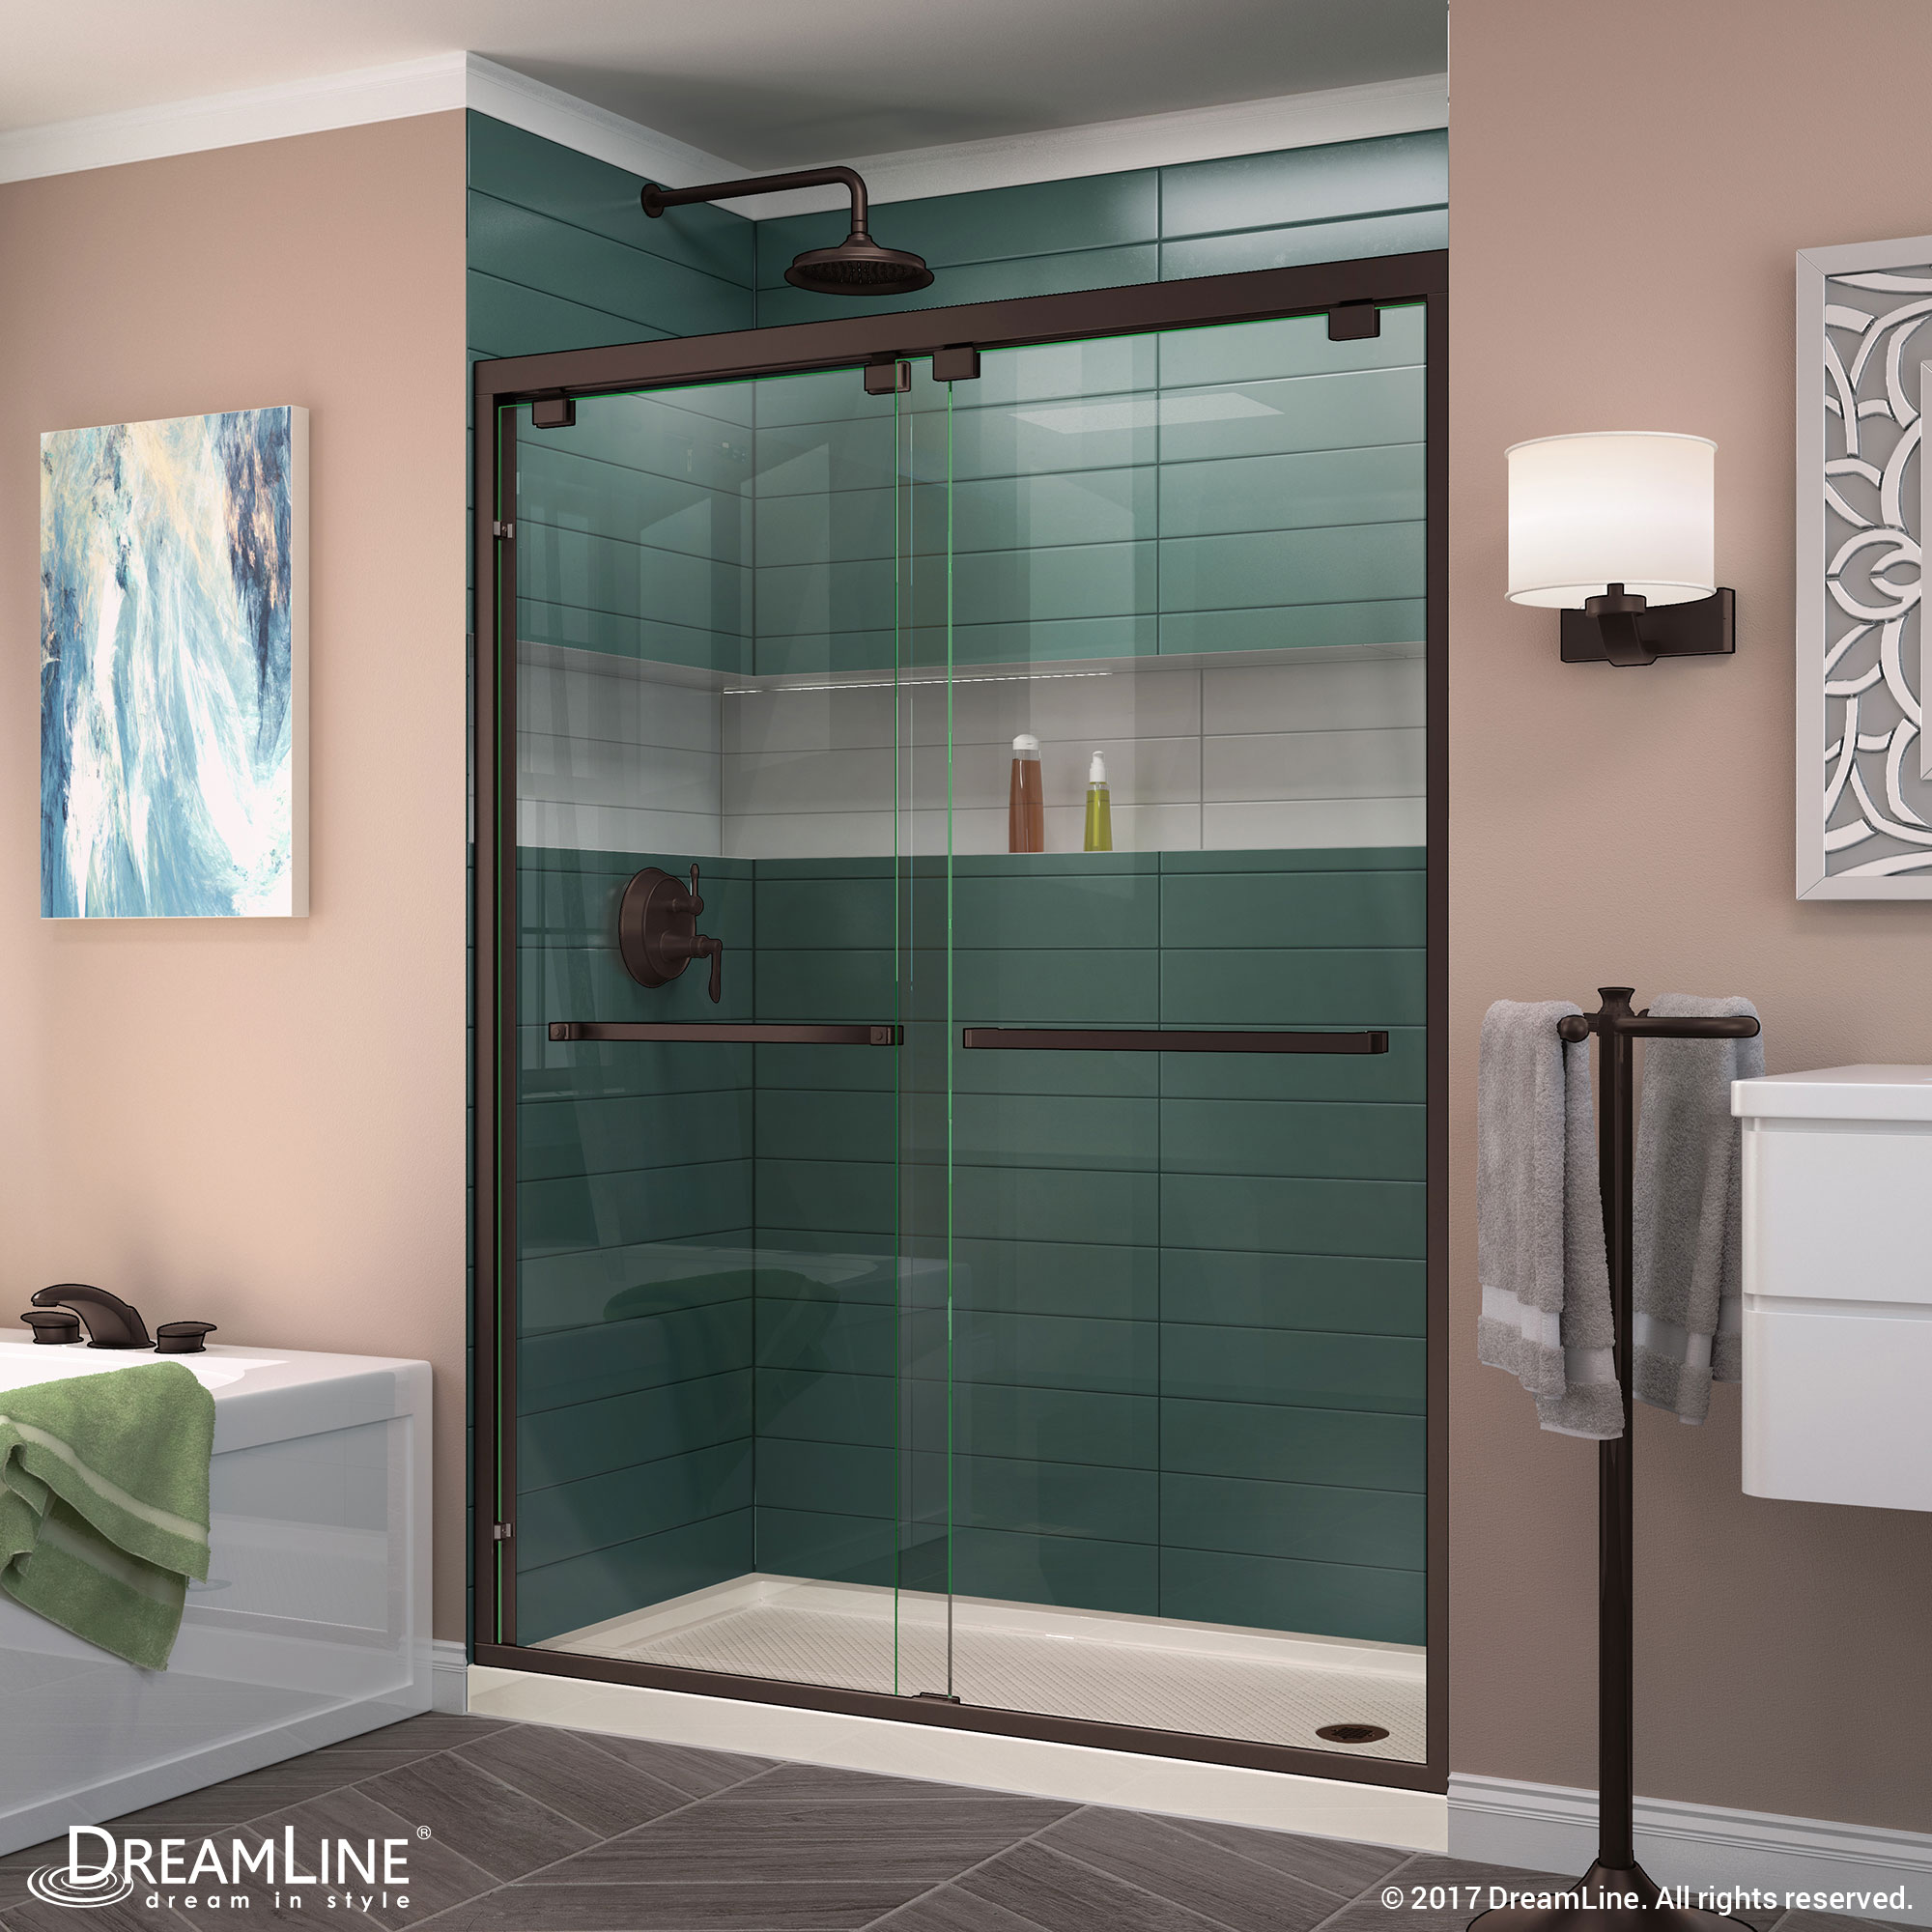 DreamLine Encore 36 in. D x 60 in. W x 78 3/4 in. H Bypass Shower Door in Brushed Nickel and Right Drain Biscuit Base Kit